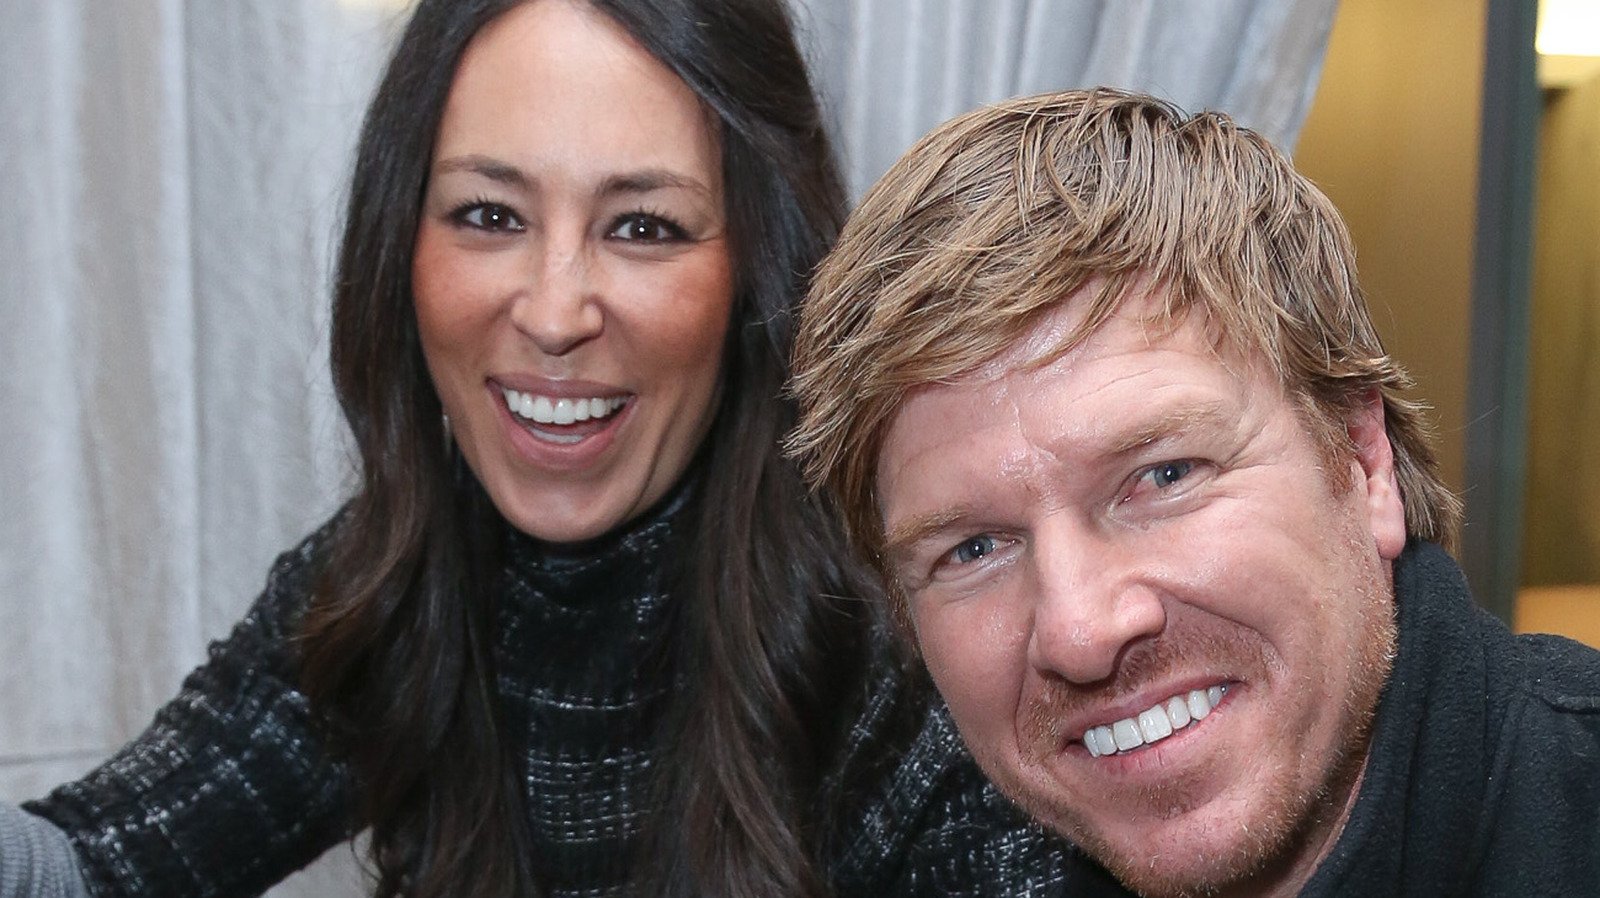 Times Chip And Joanna Gaines Went Too Far On Fixer Upper